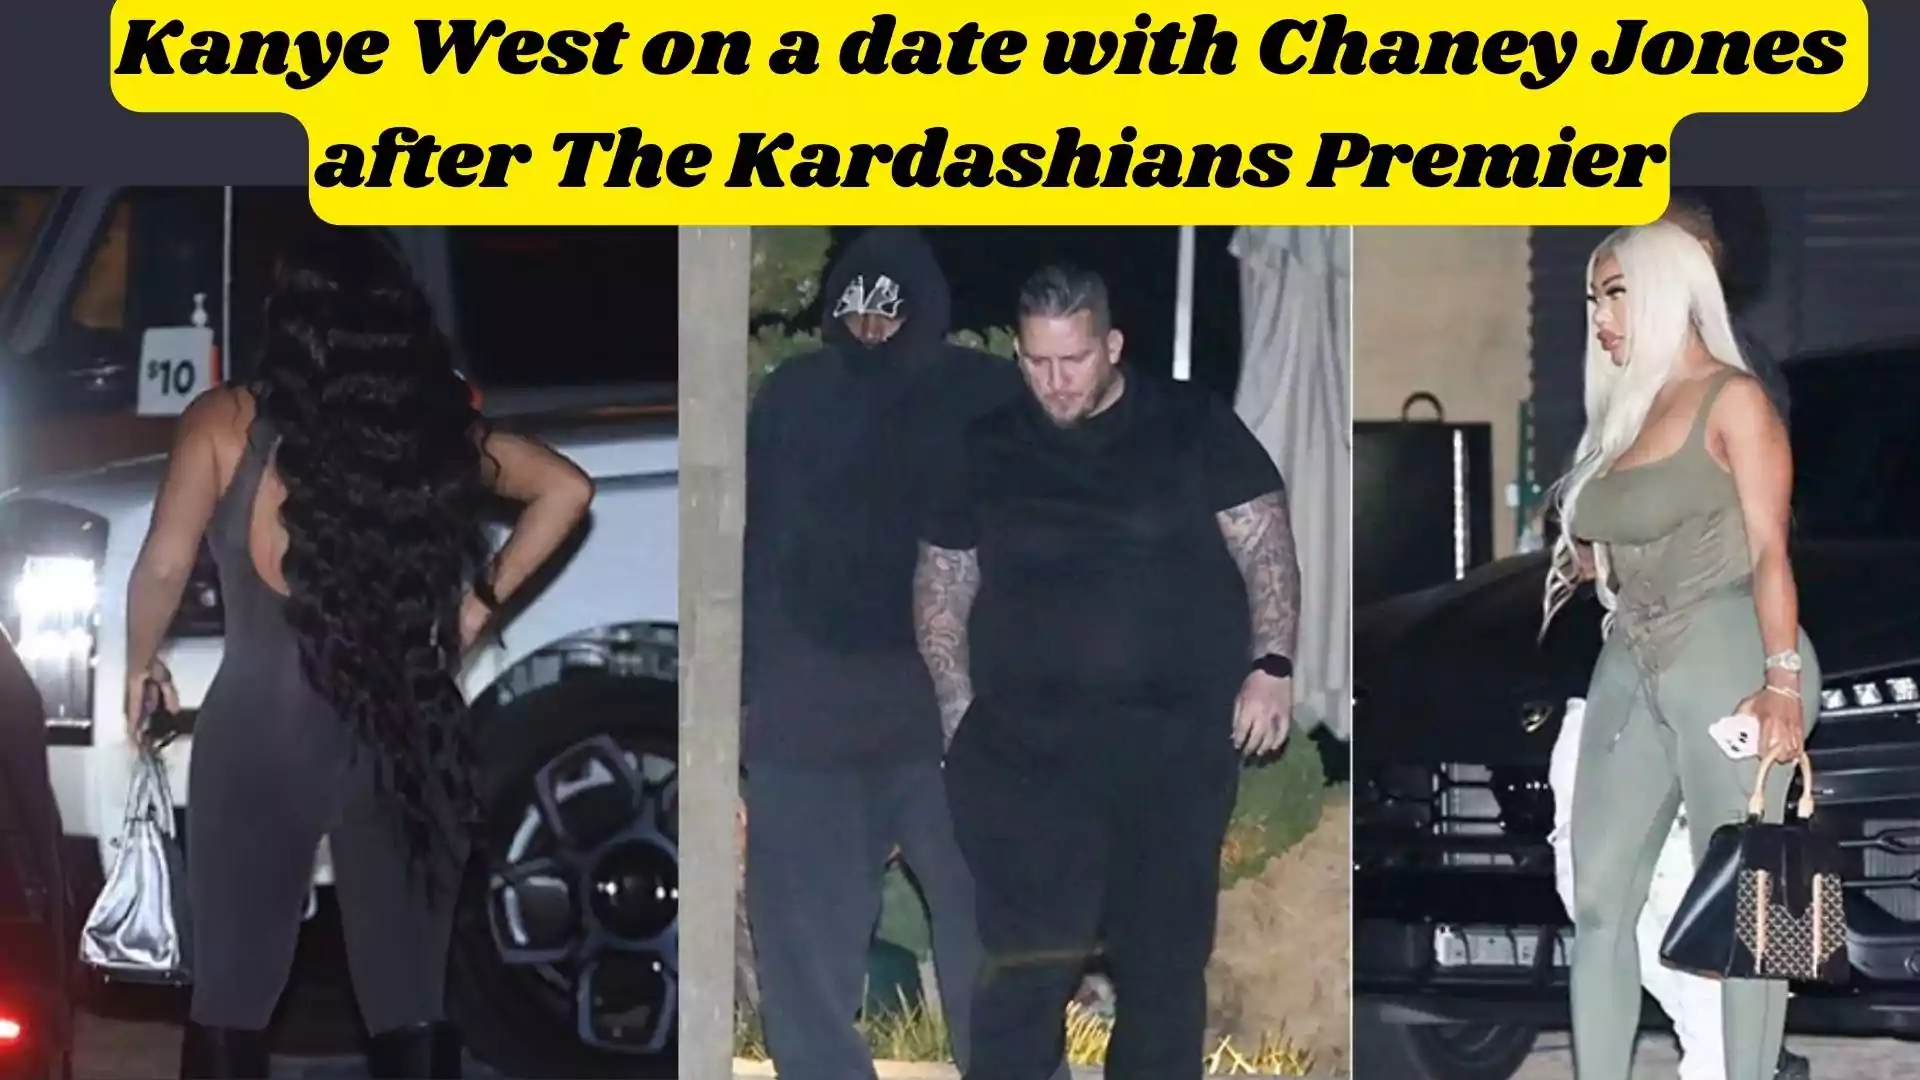 Kanye West on a date with Chaney Jones after The Kardashians Premier wallpaper and images